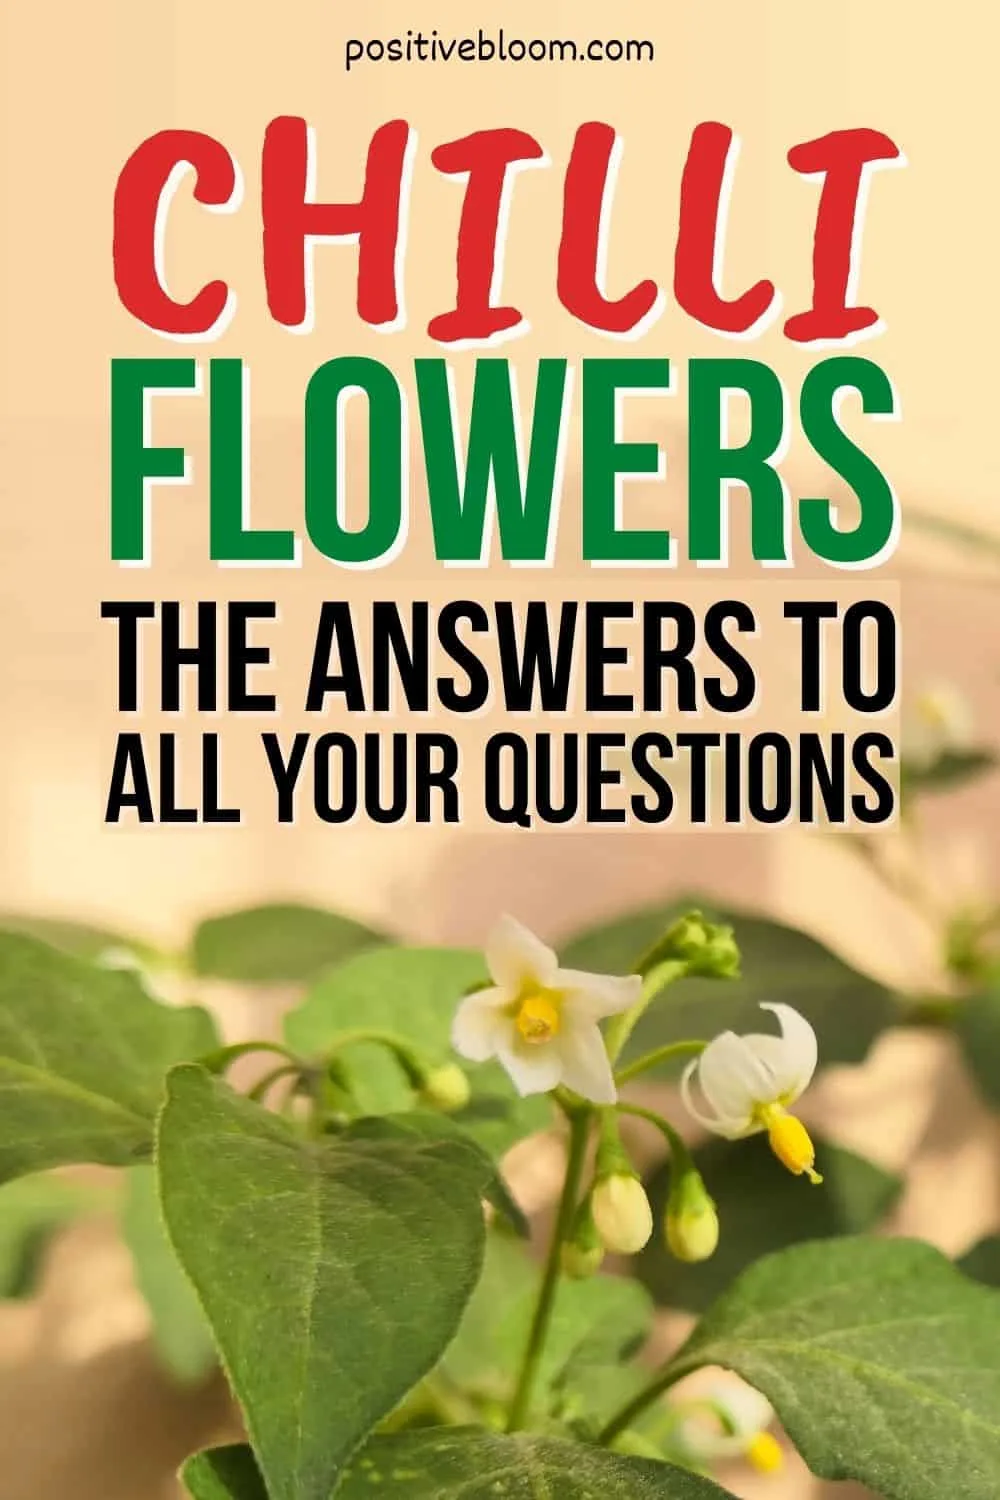 Chilli Flowers The Answers To All Your Questions